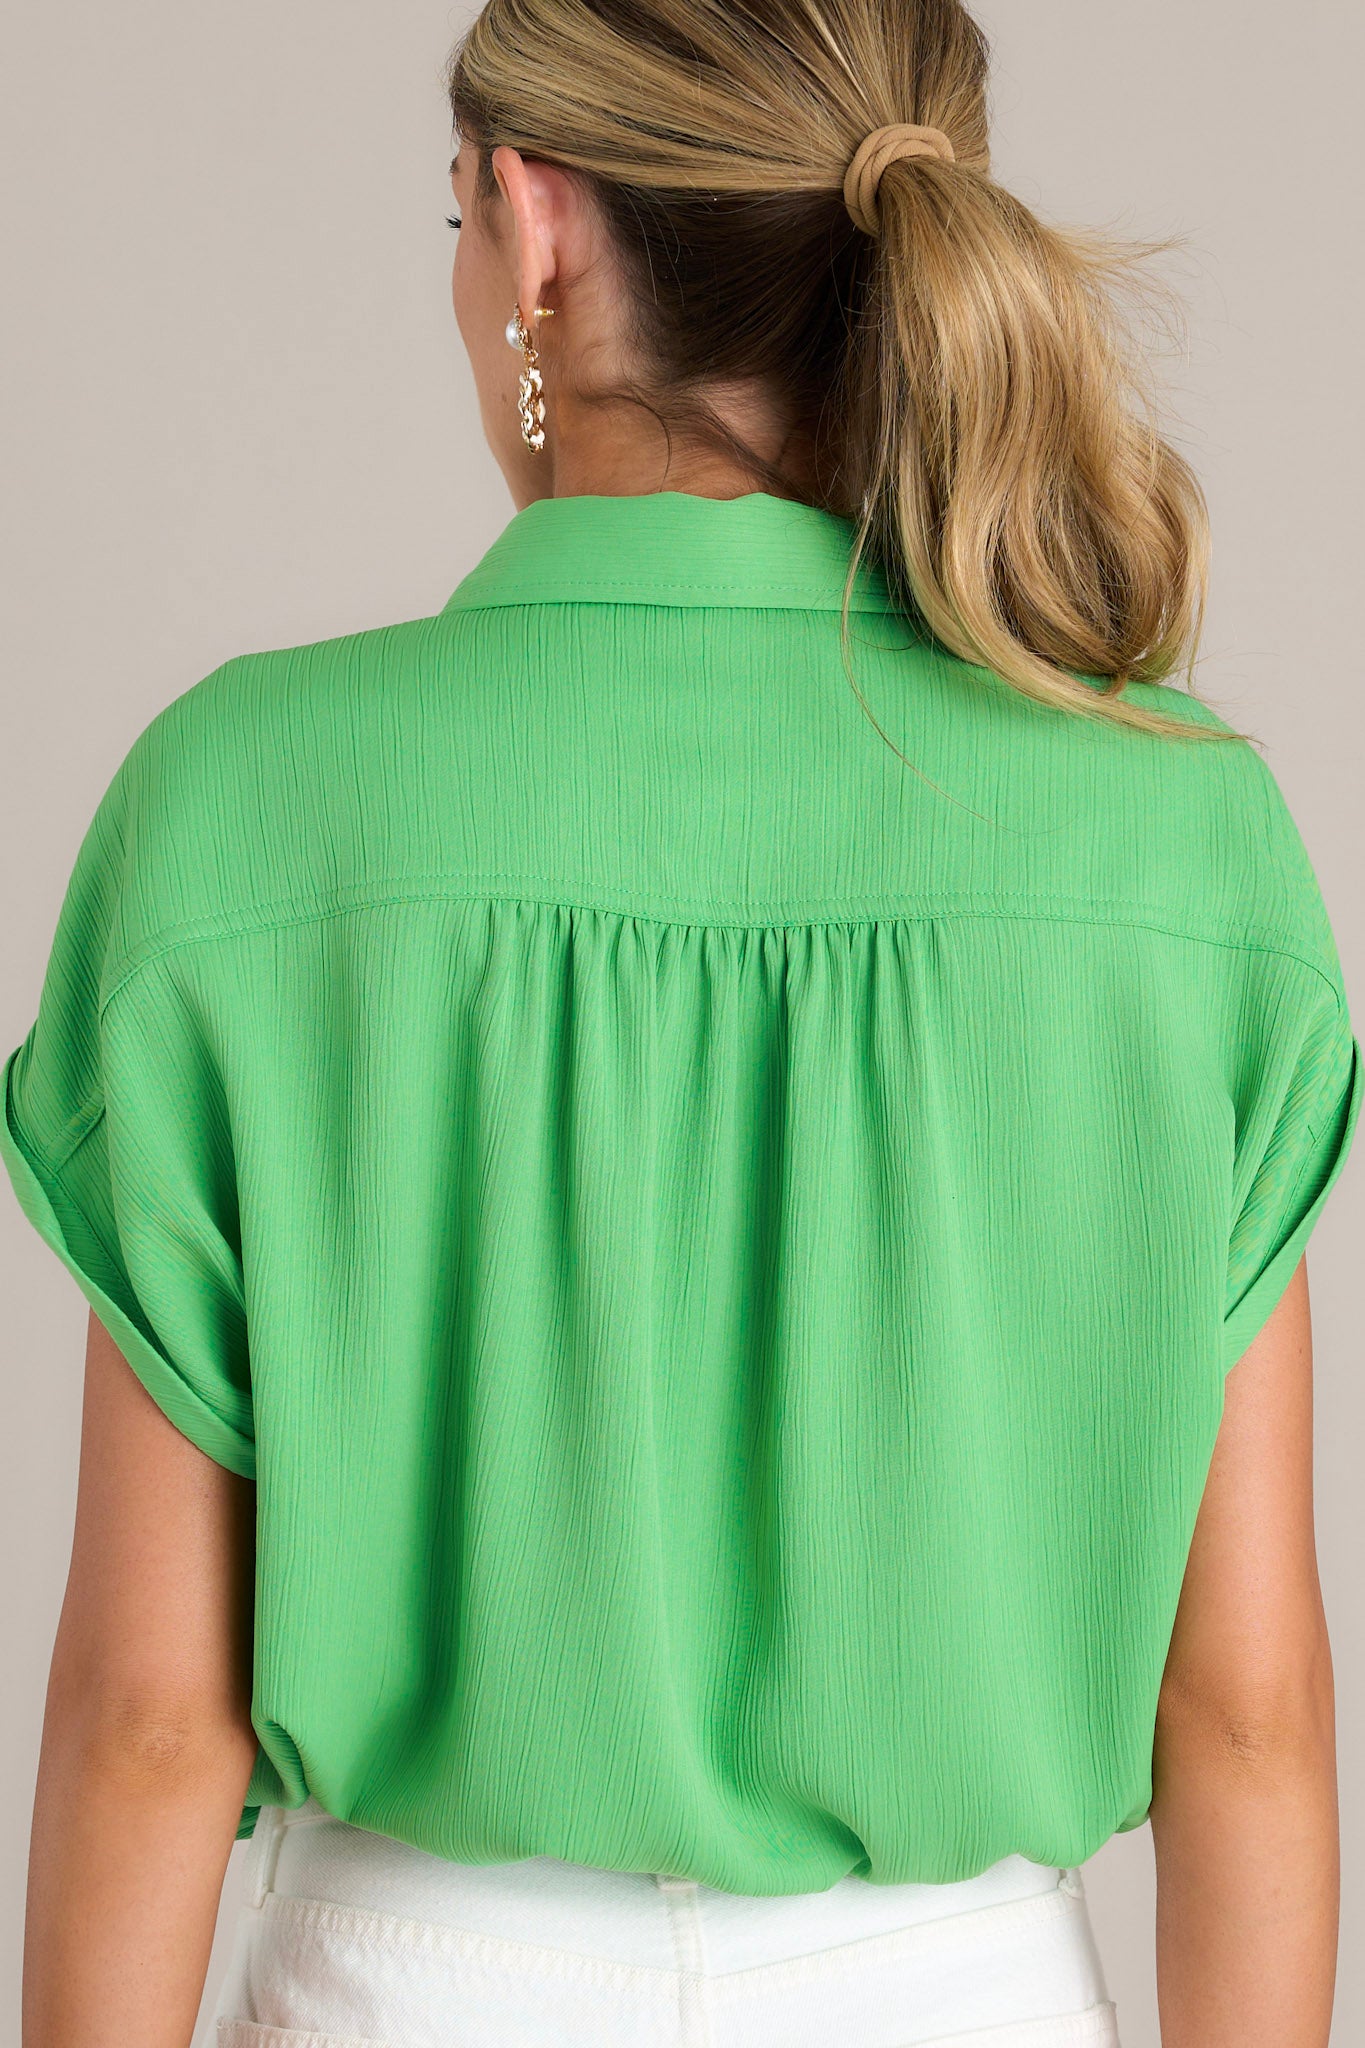 Back view of a green top highlighting the relaxed fit, cuffed short sleeves, and self-tie drawstring hemline.